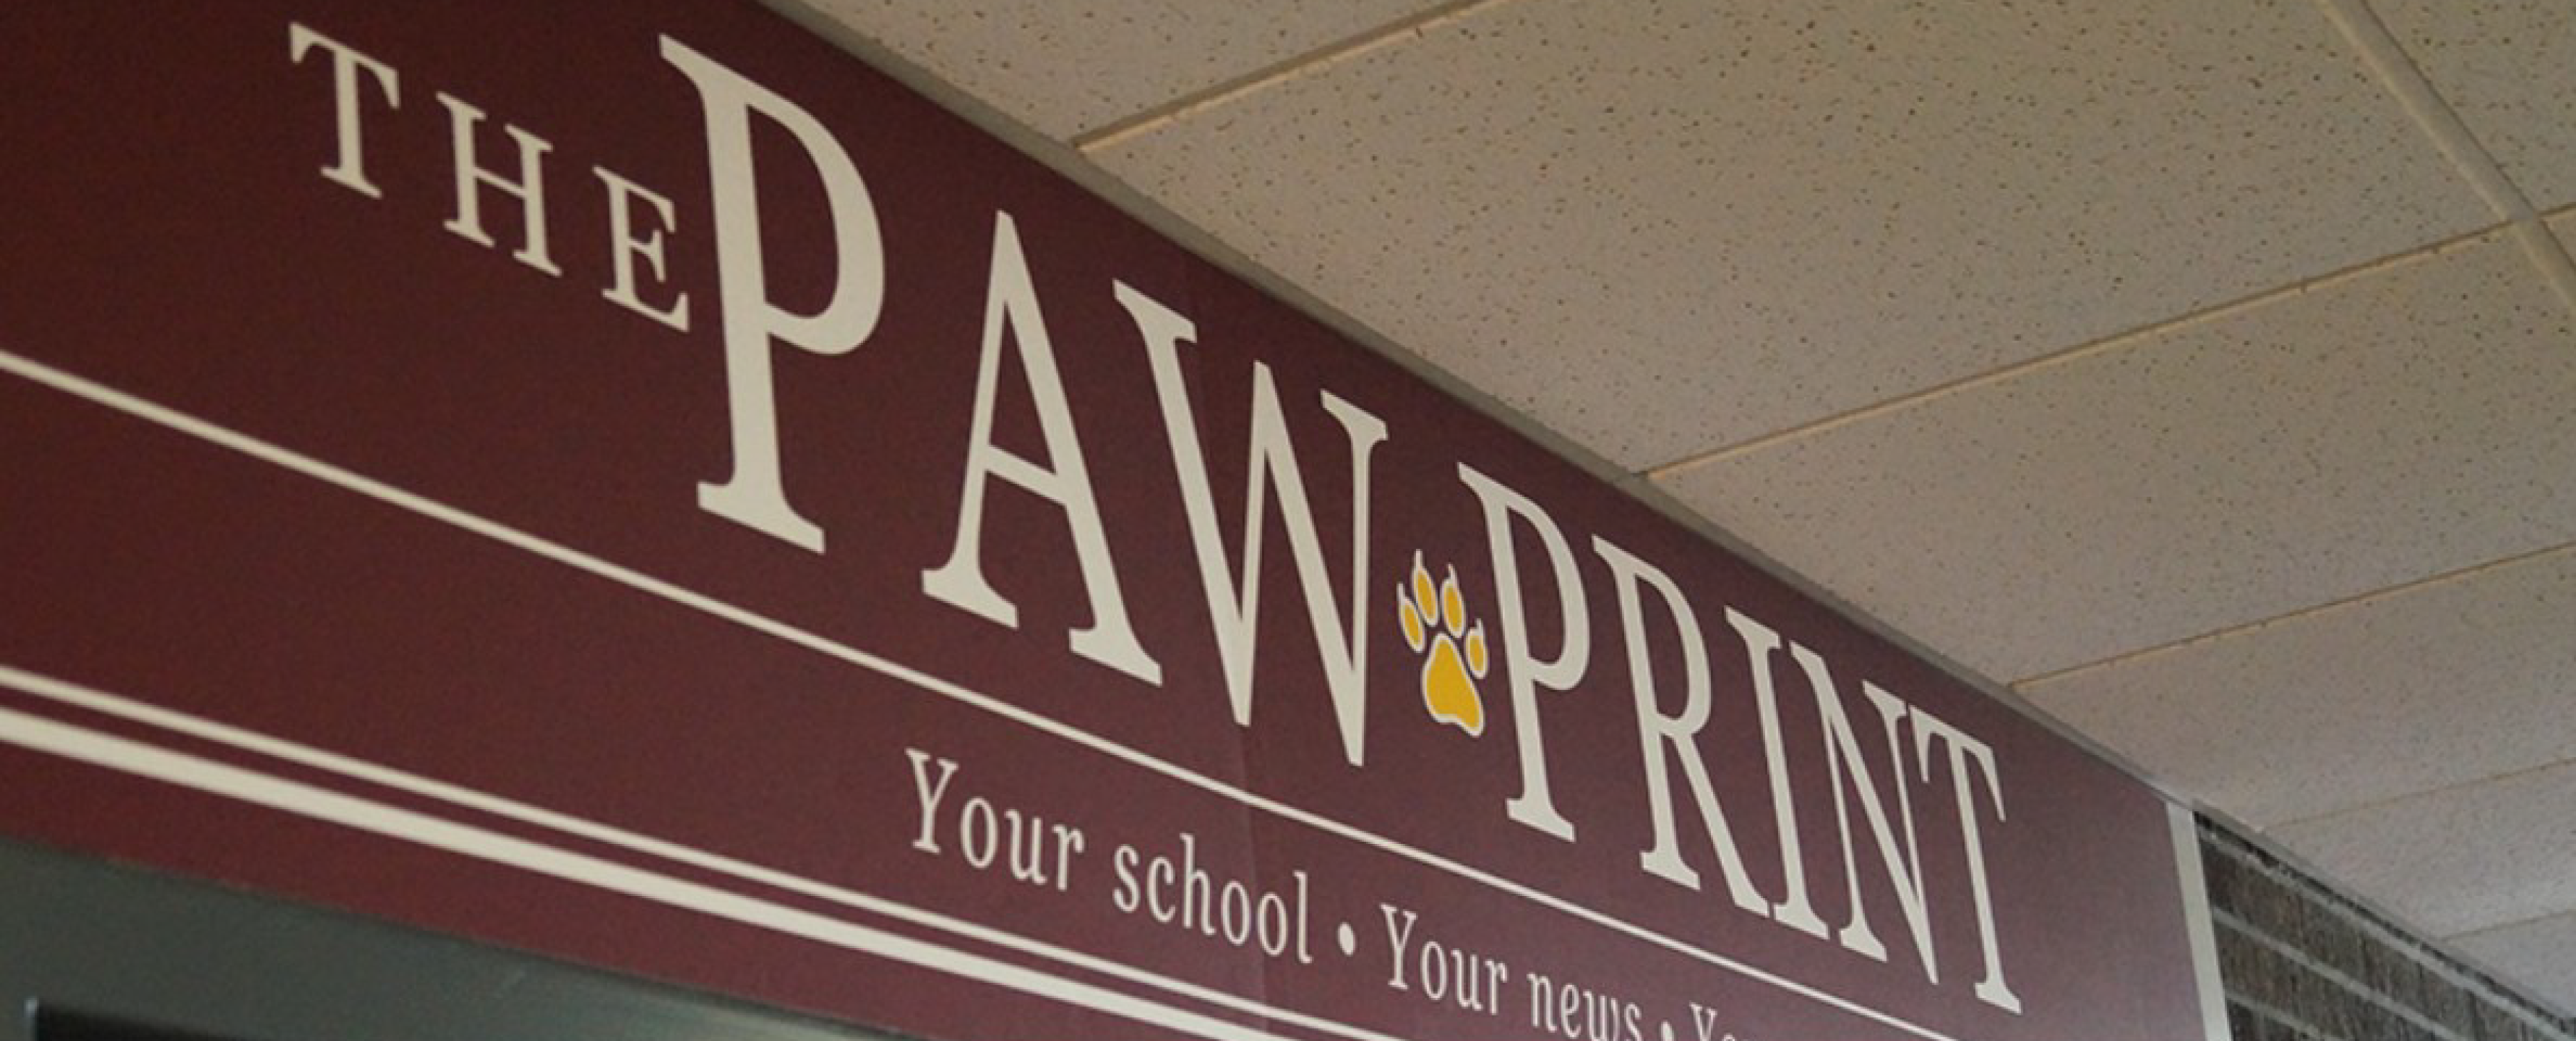 A maroon sign above a doorway reads "The Paw Print" in white lettering.